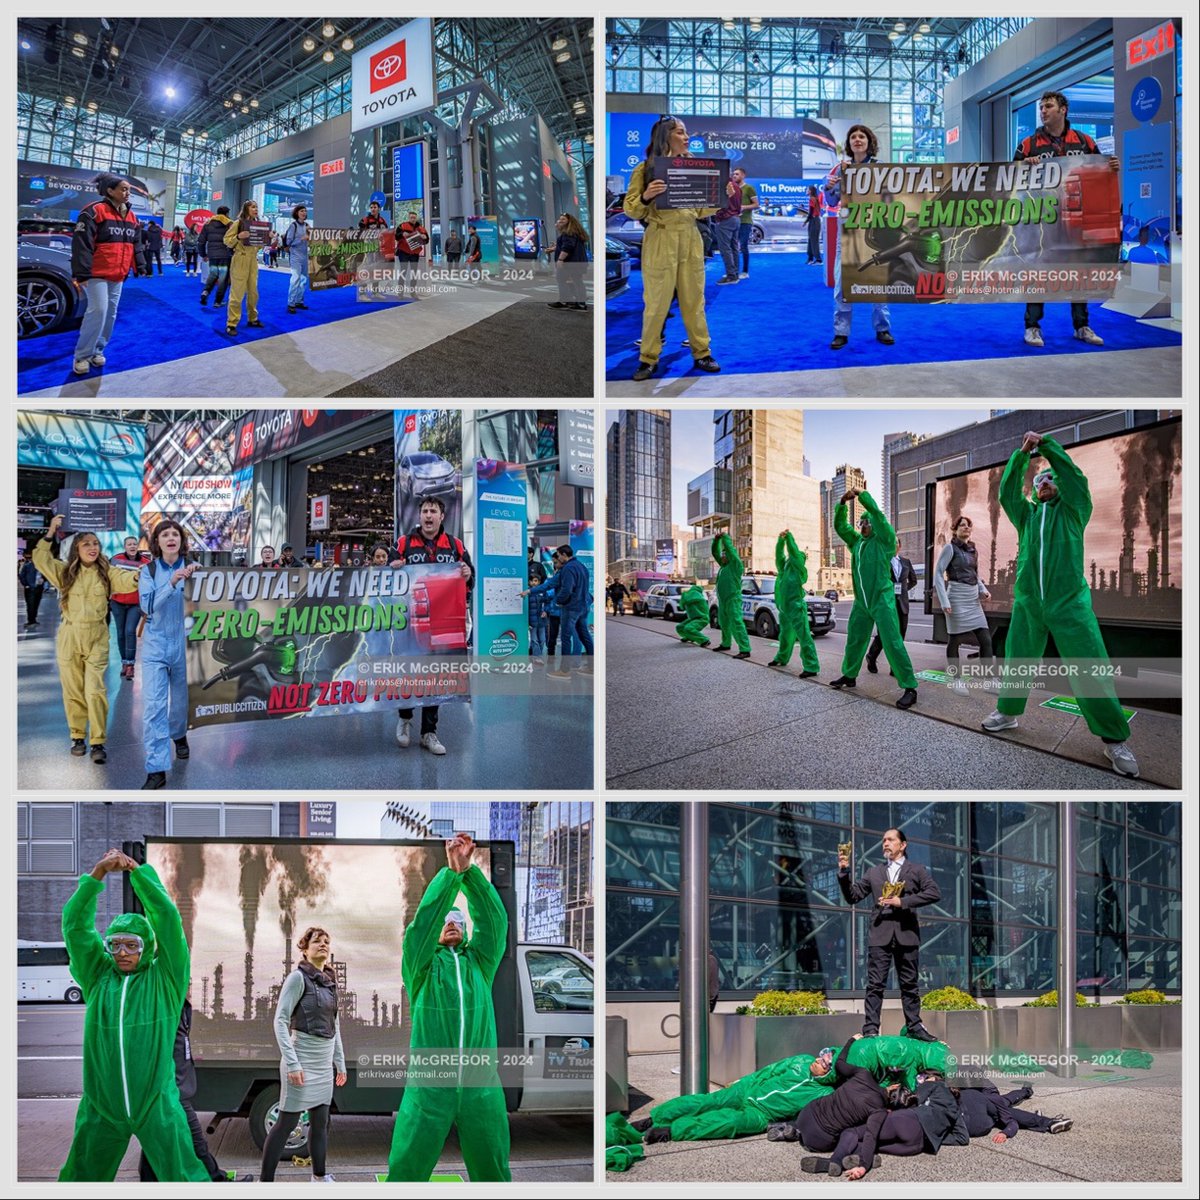 At NY Auto Show, Public Citizen And Mighty Earth Pressure Toyota And Hyundai To Clean Up Supply Chains flic.kr/s/aHBqjBjpYf @Insure_Future @InsOurFuture @climatedef @pop4climate @nychange @RAN @public_citizen @StopMoneyPipe @riseandresistny @350Brooklyn @FFF_NYC_ @thirdactorg